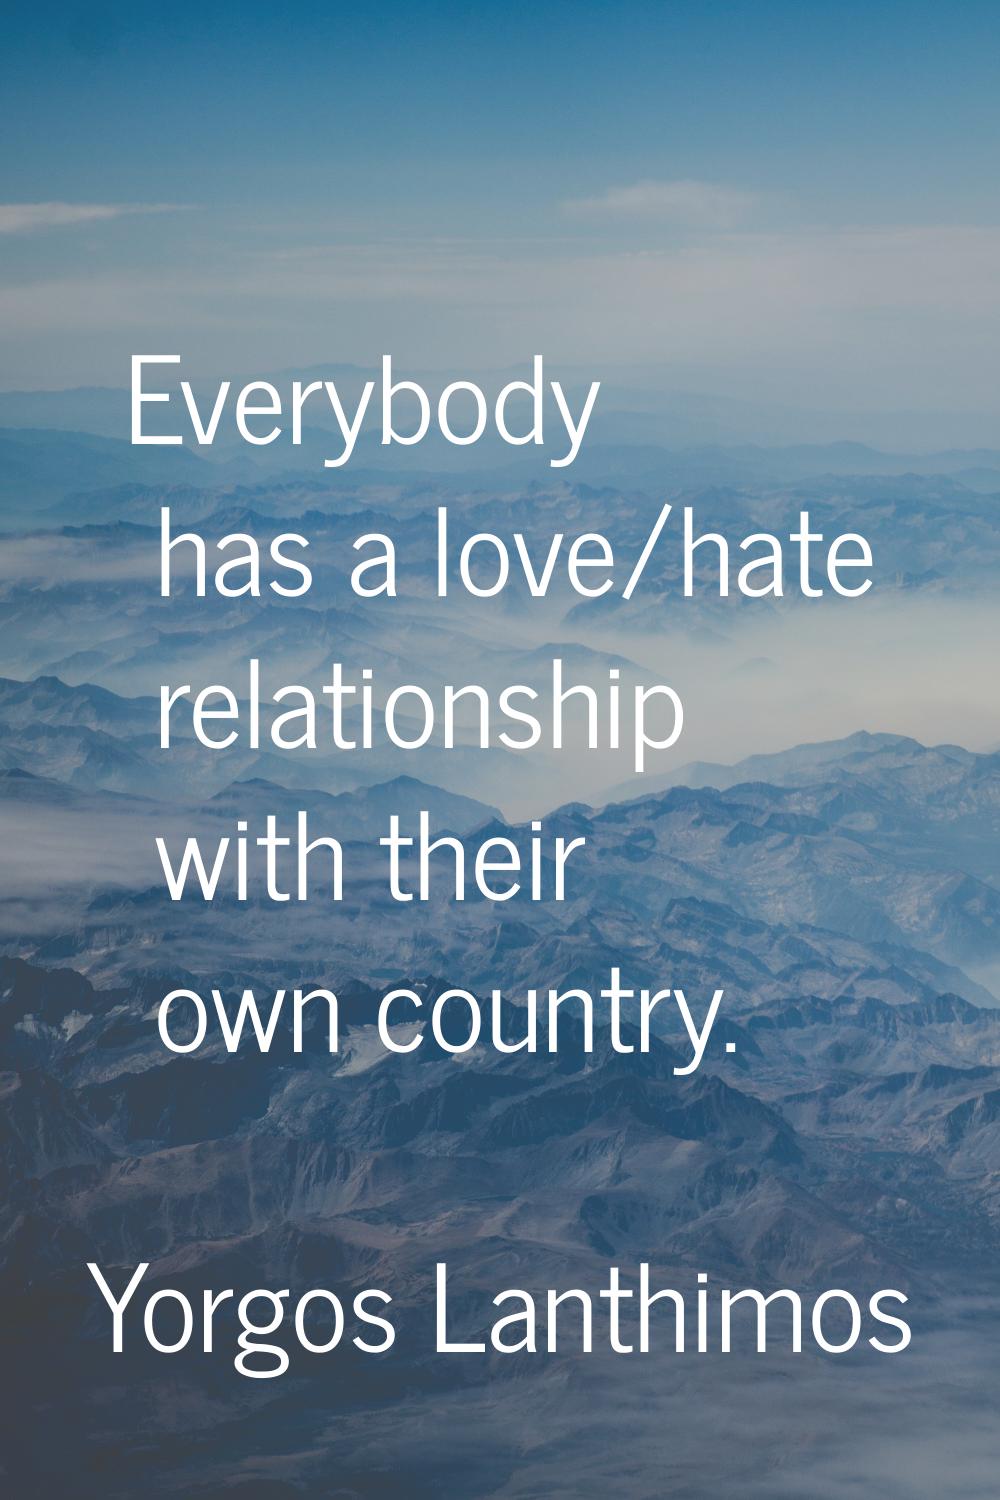 Everybody has a love/hate relationship with their own country.